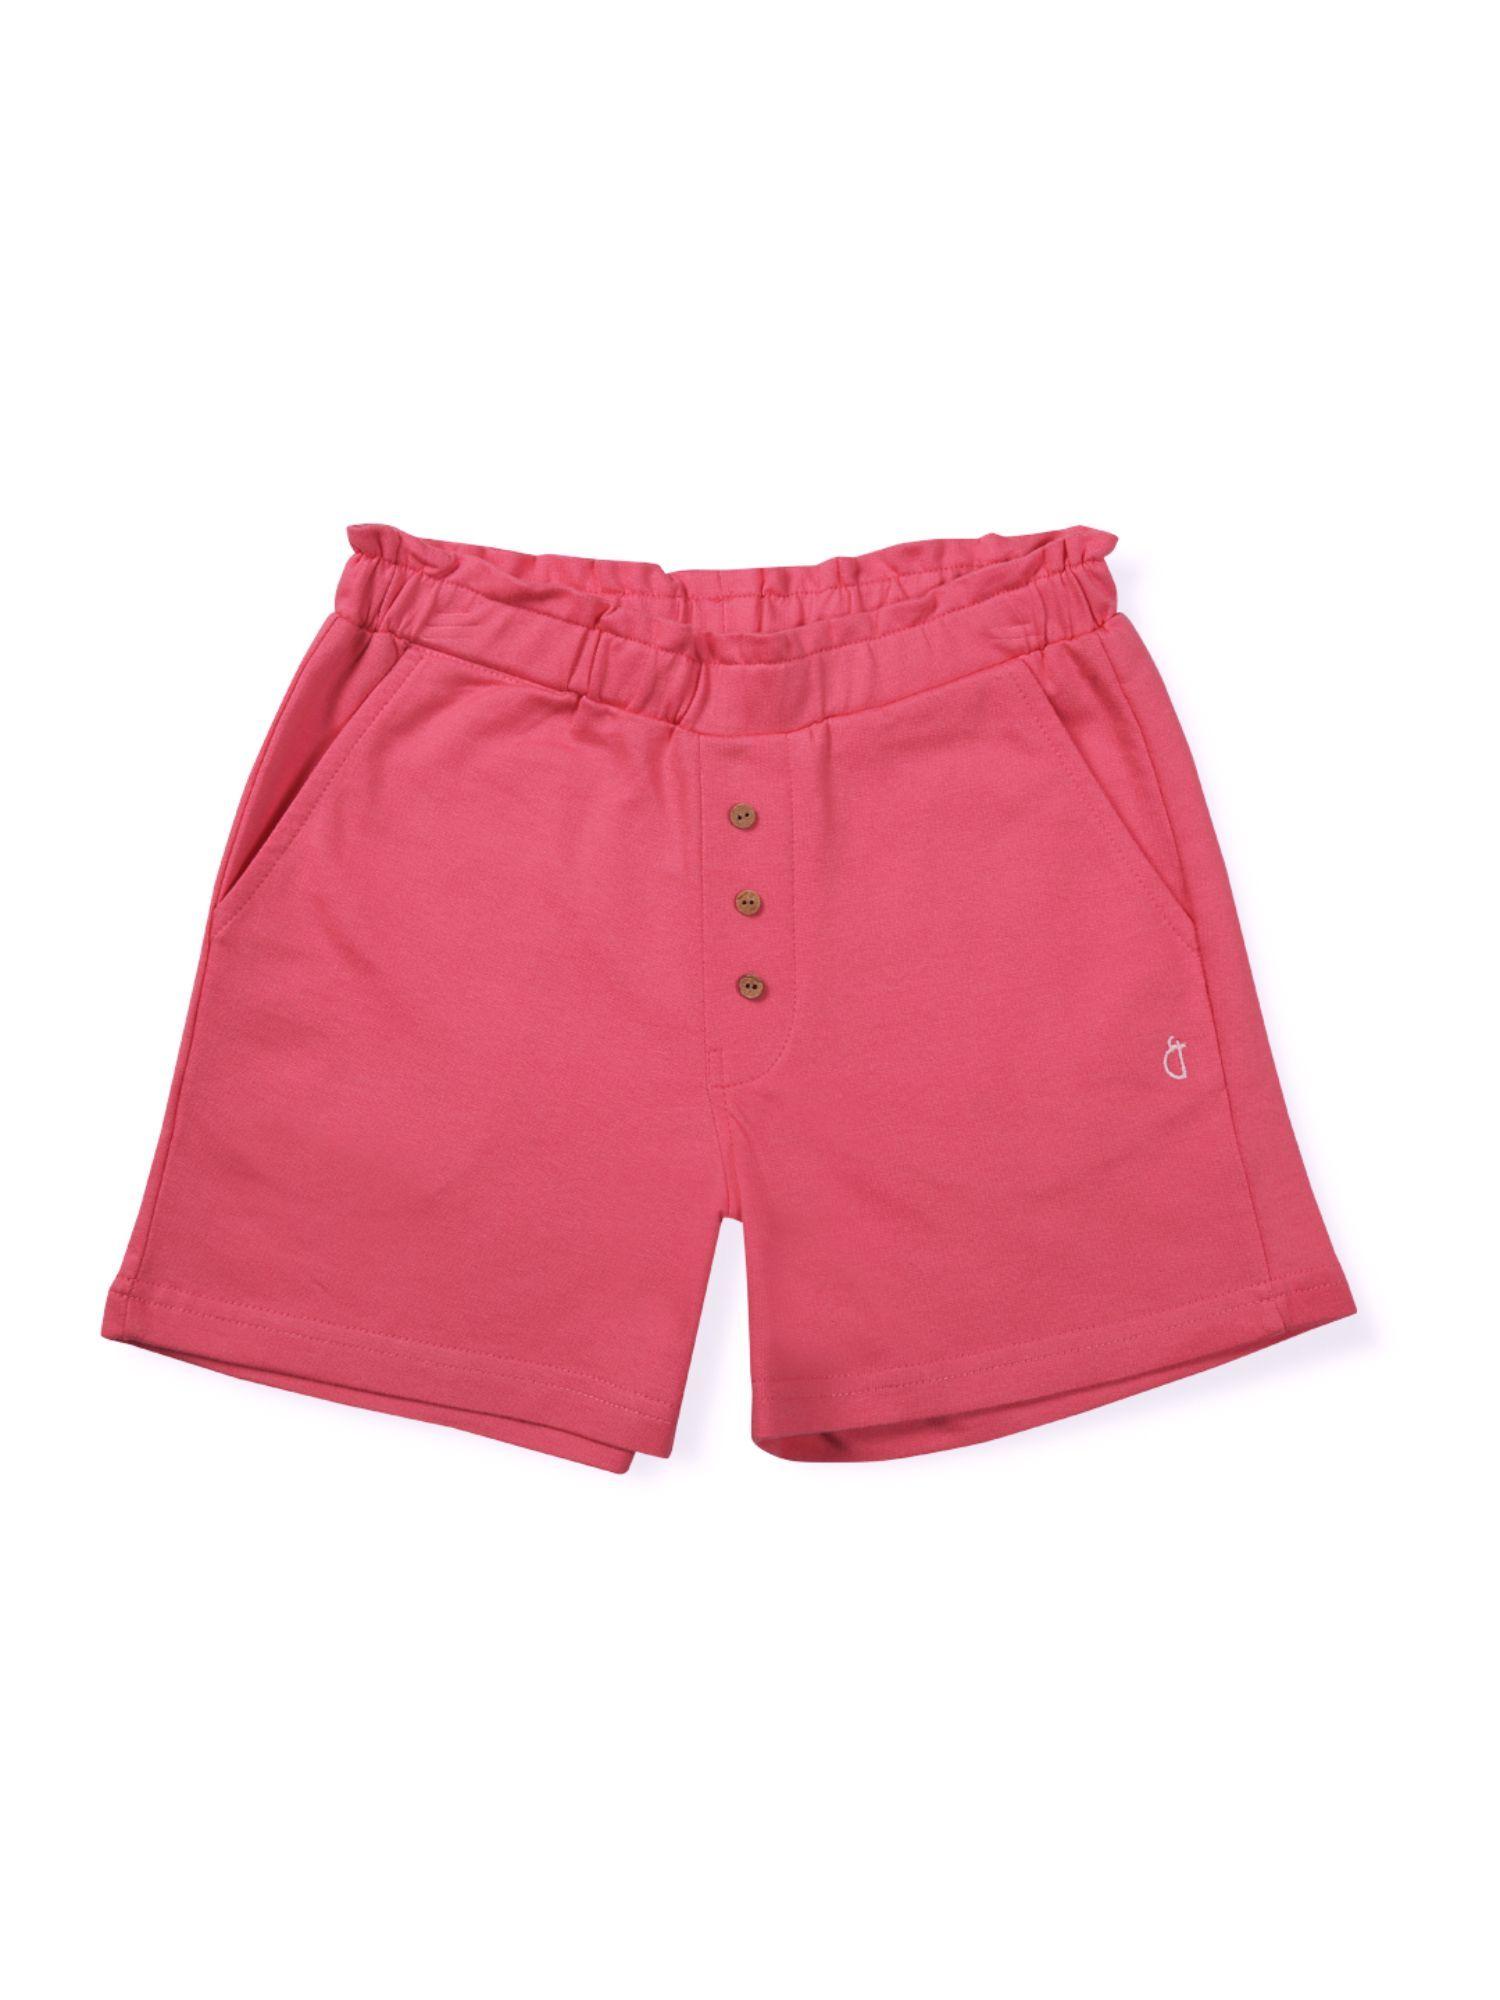 girls pink solid cotton elasticated shorts